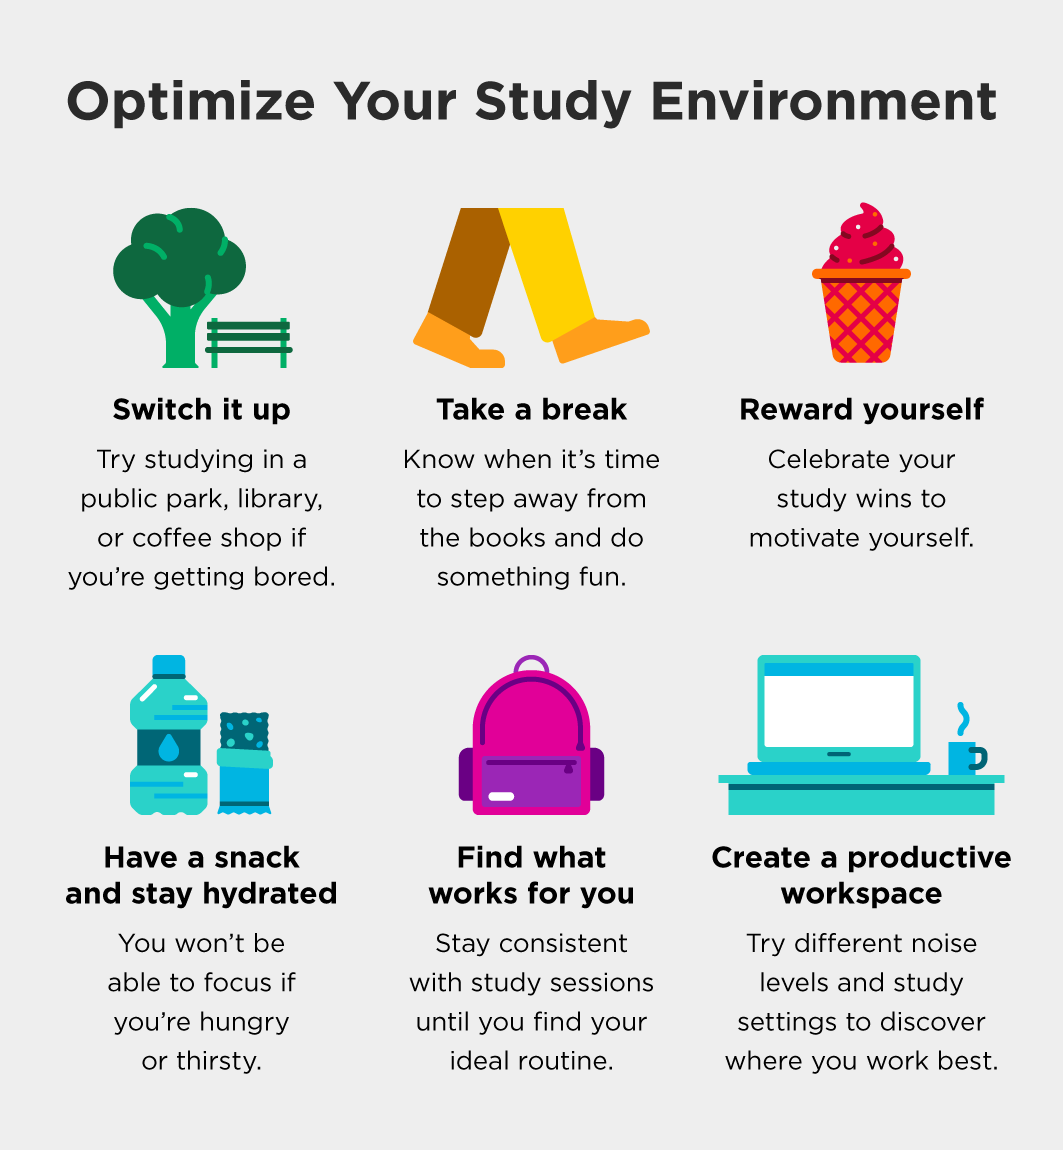 Image recaps tips to make an effective study environment.